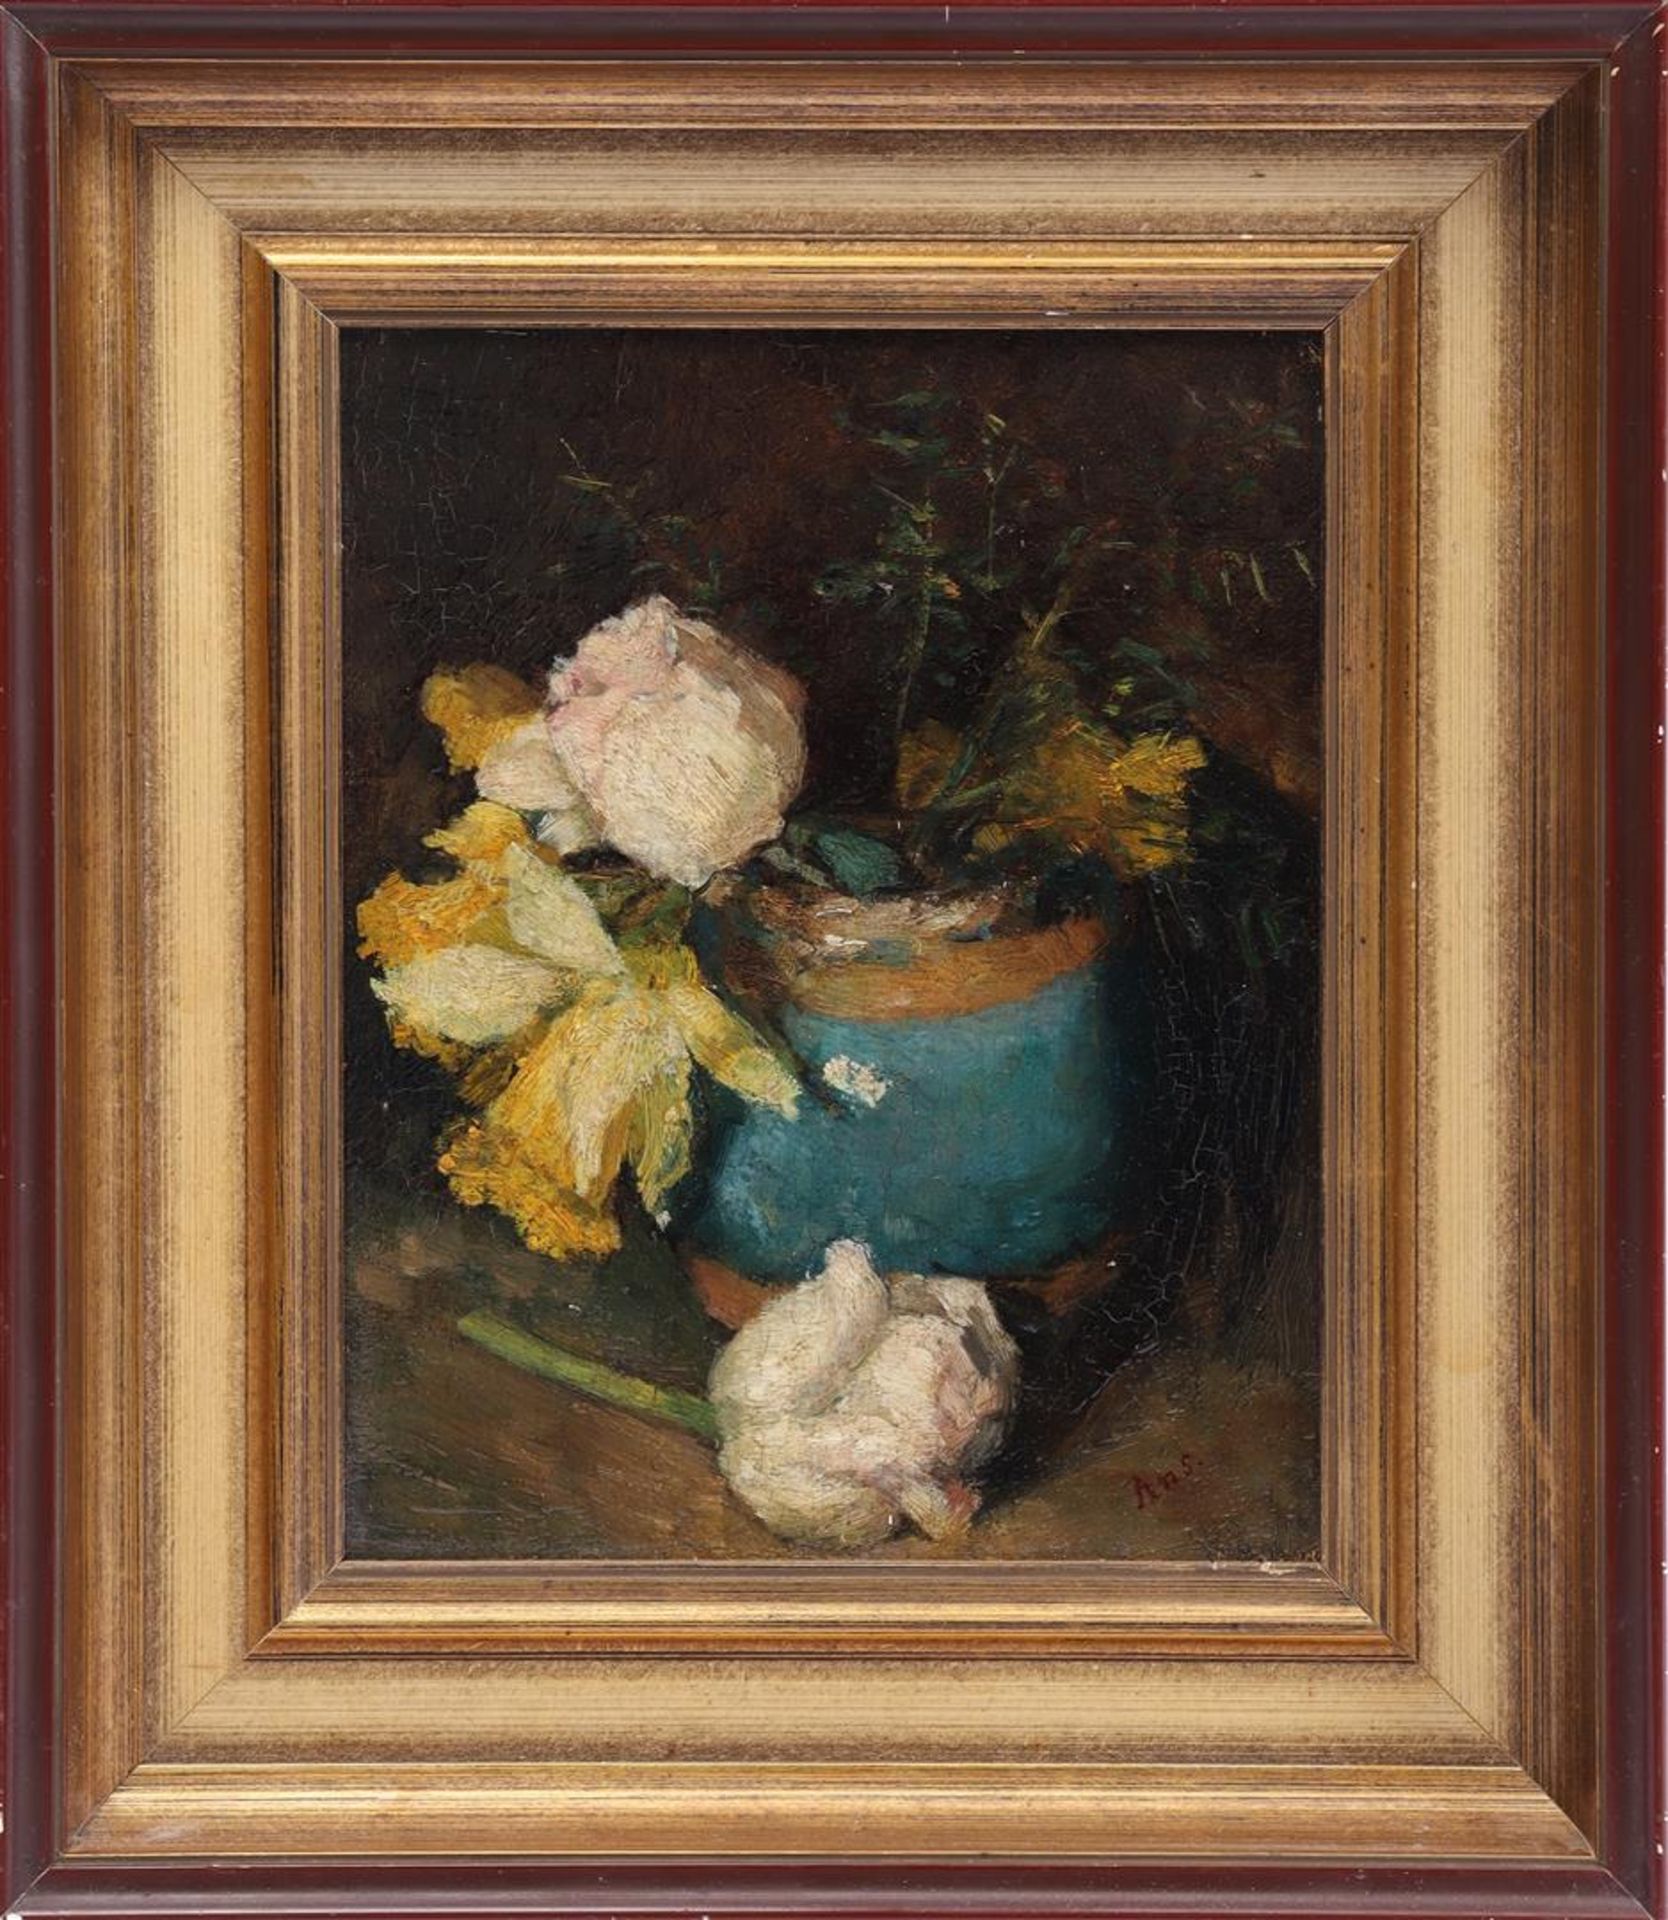 Signed Ans, ginger jar with flowers